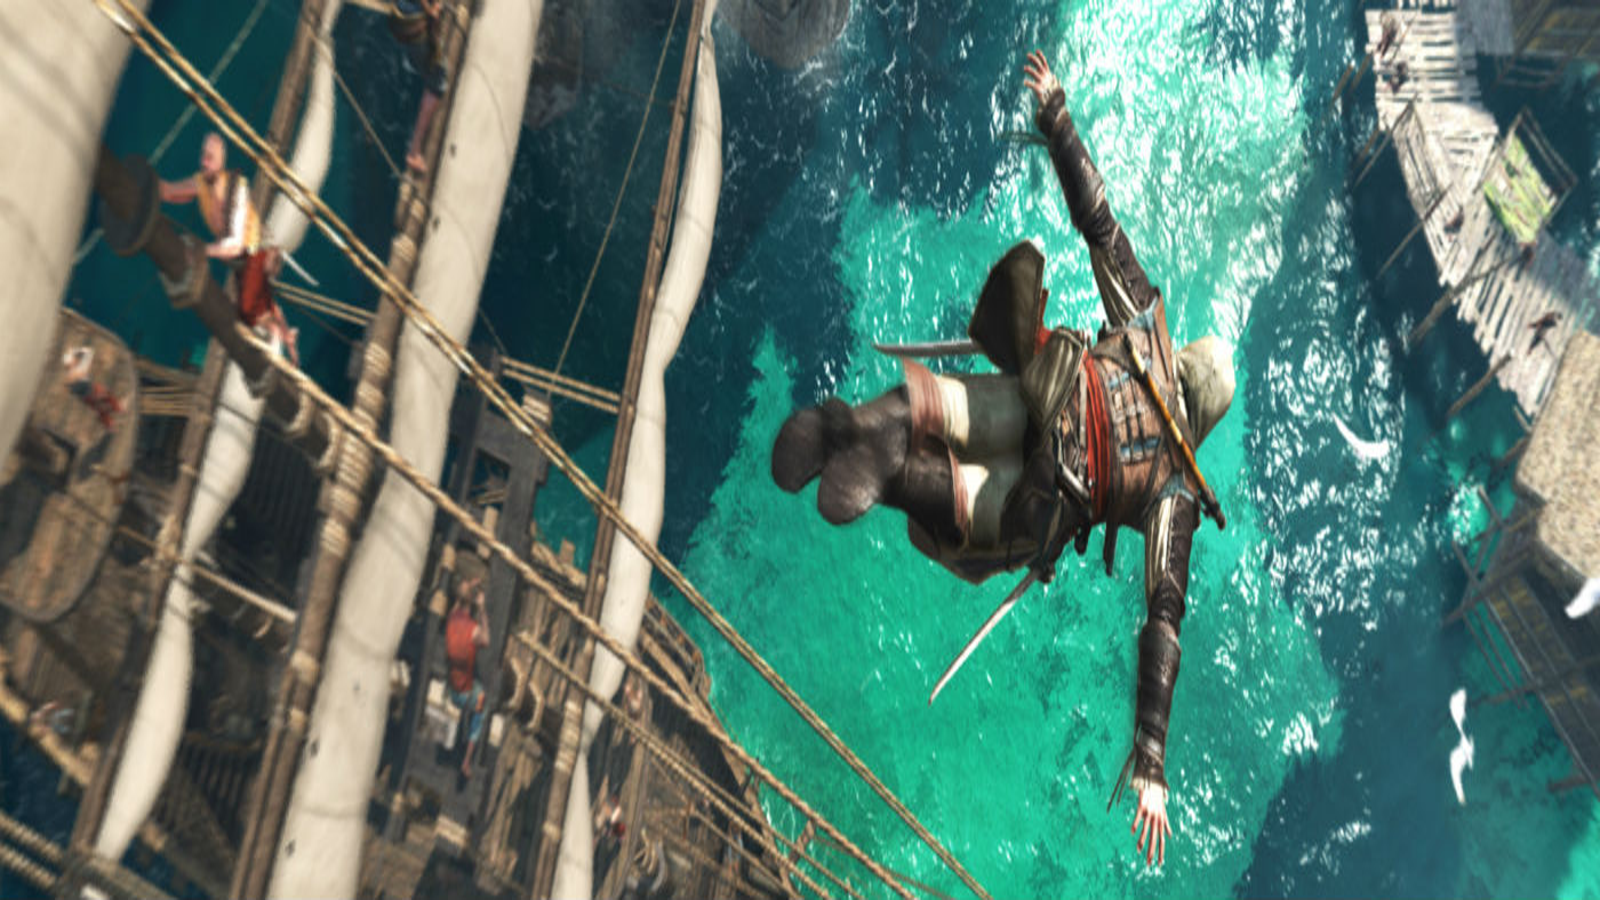 Assassin's Creed III Was Disappointing. How Does Black Flag Stack Up?